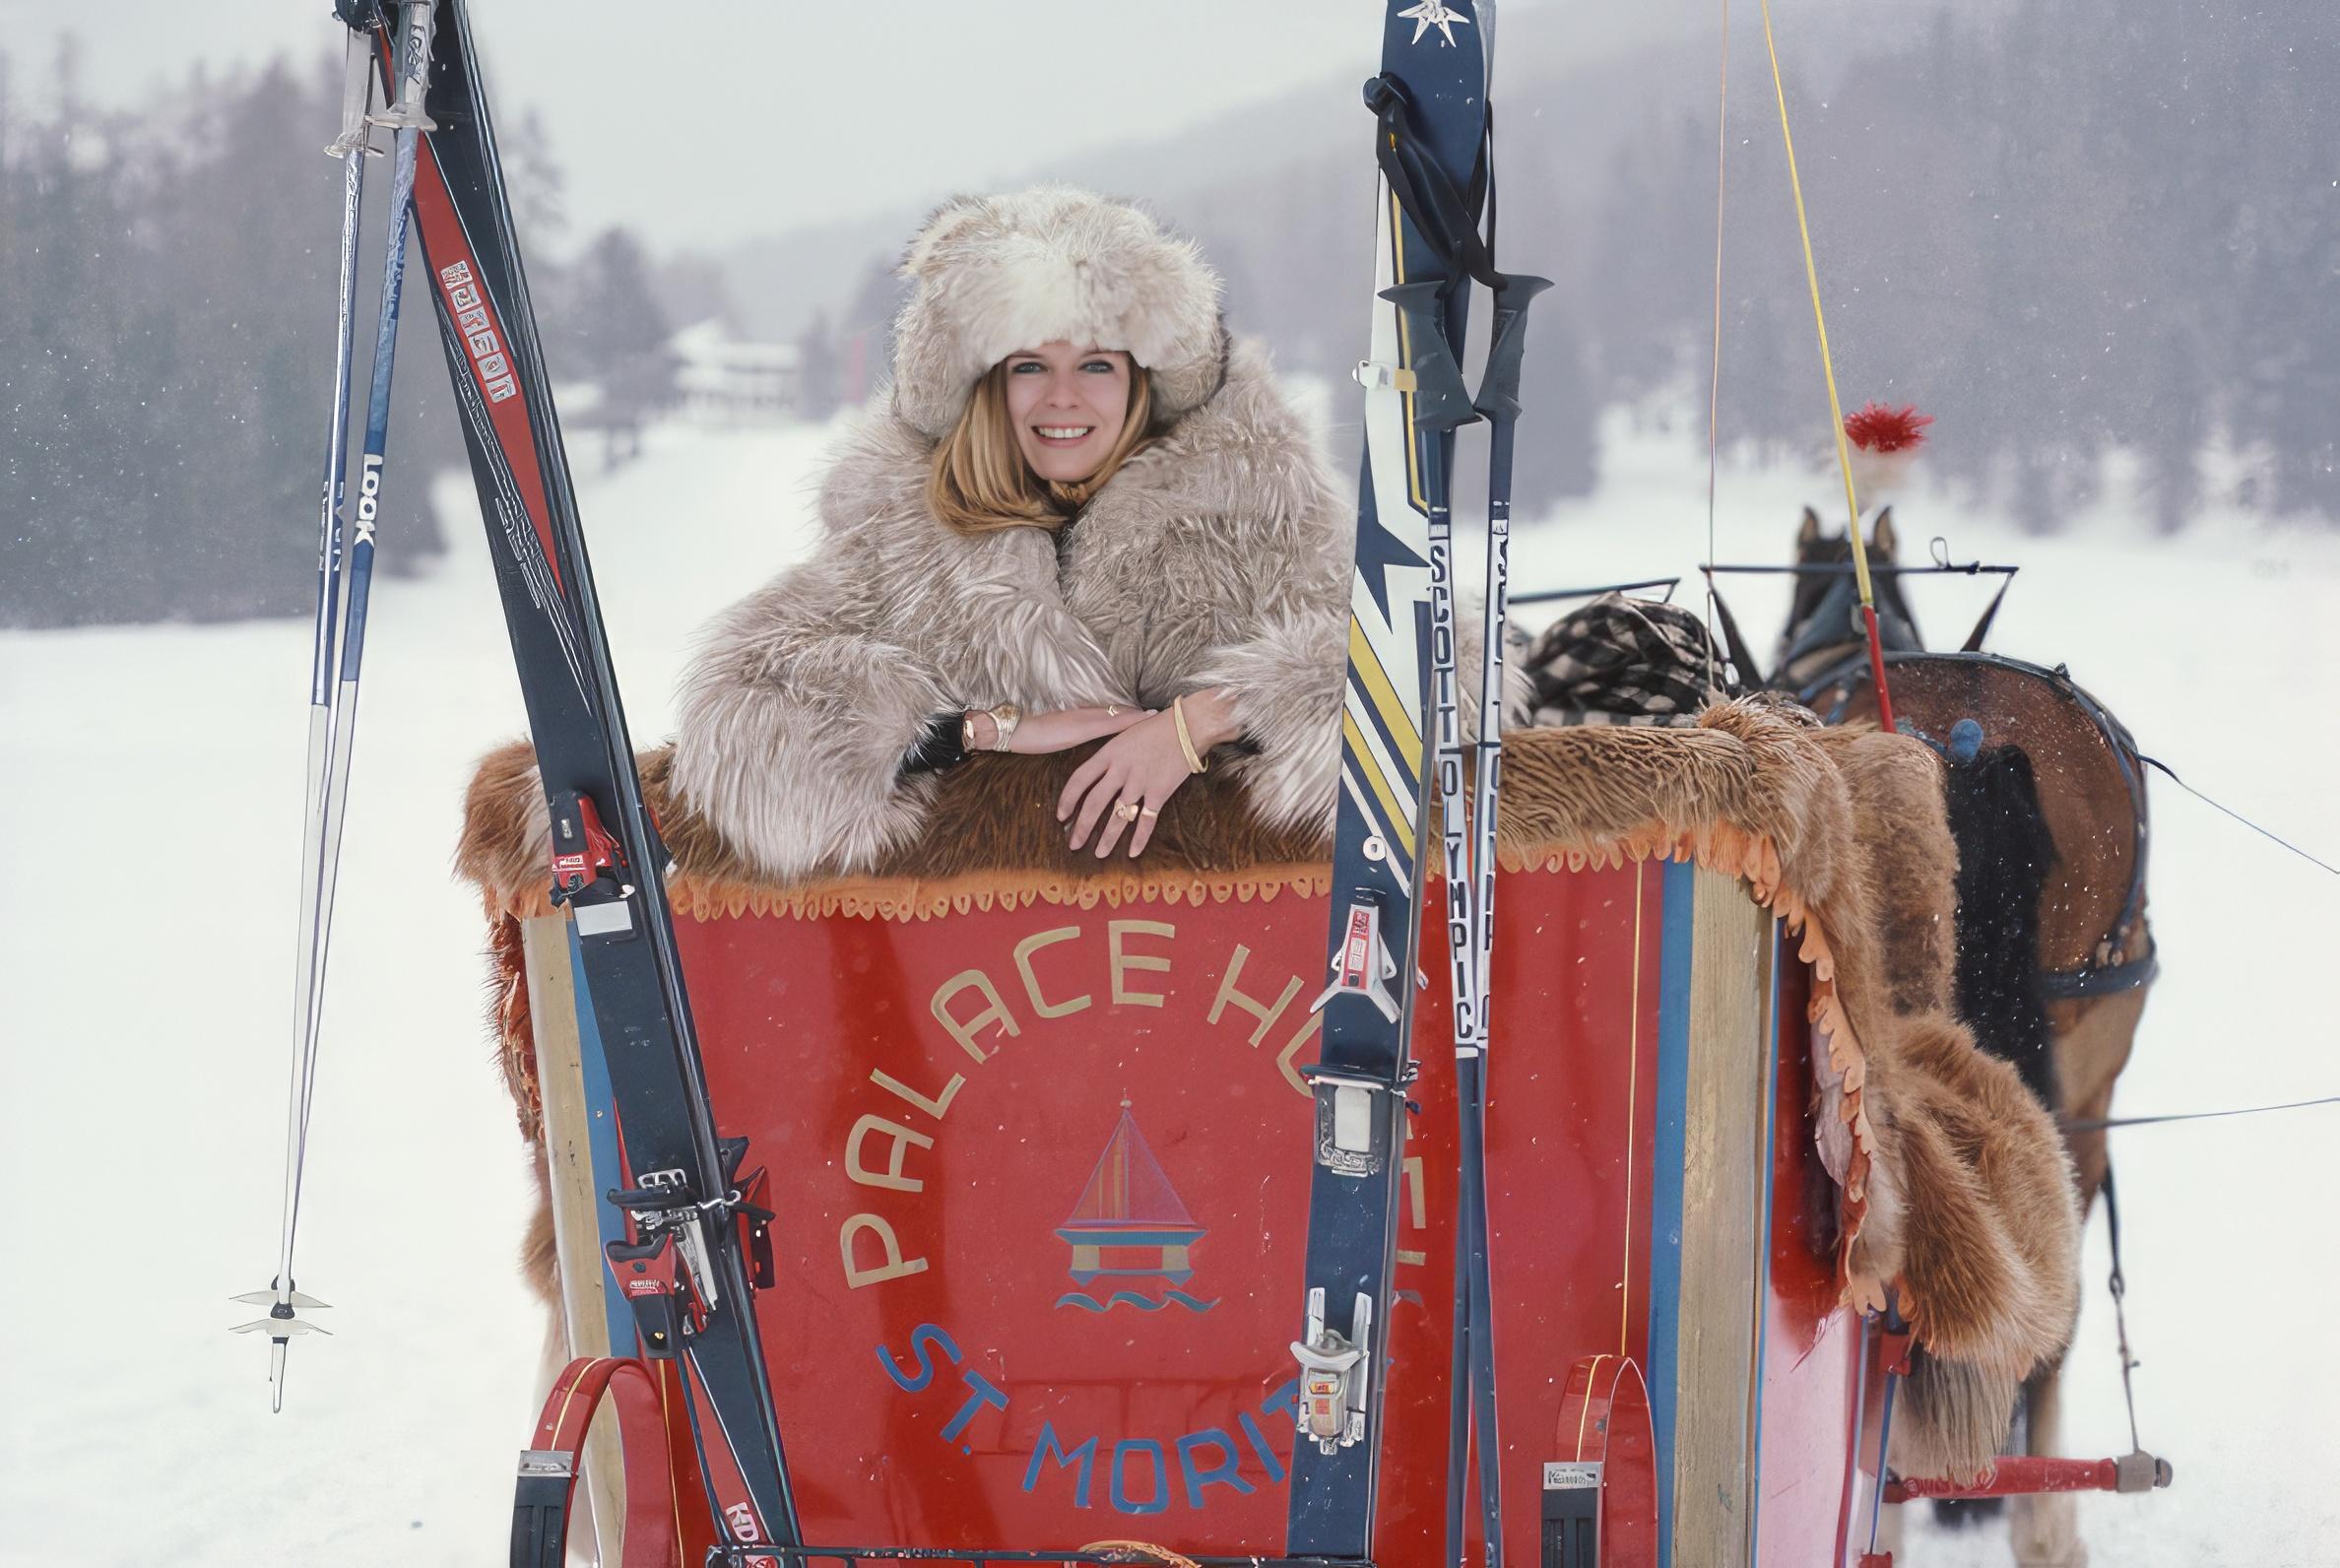 Slim Aarons
Skiing In St. Moritz
1983
C print
Estate stamped and hand numbered edition of 150 with certificate of authenticity from the estate.   

Countess Jan Bonde in the Palace Hotel sleigh on Lake St. Moritz, Switzerland, 1983. (Photo by Slim